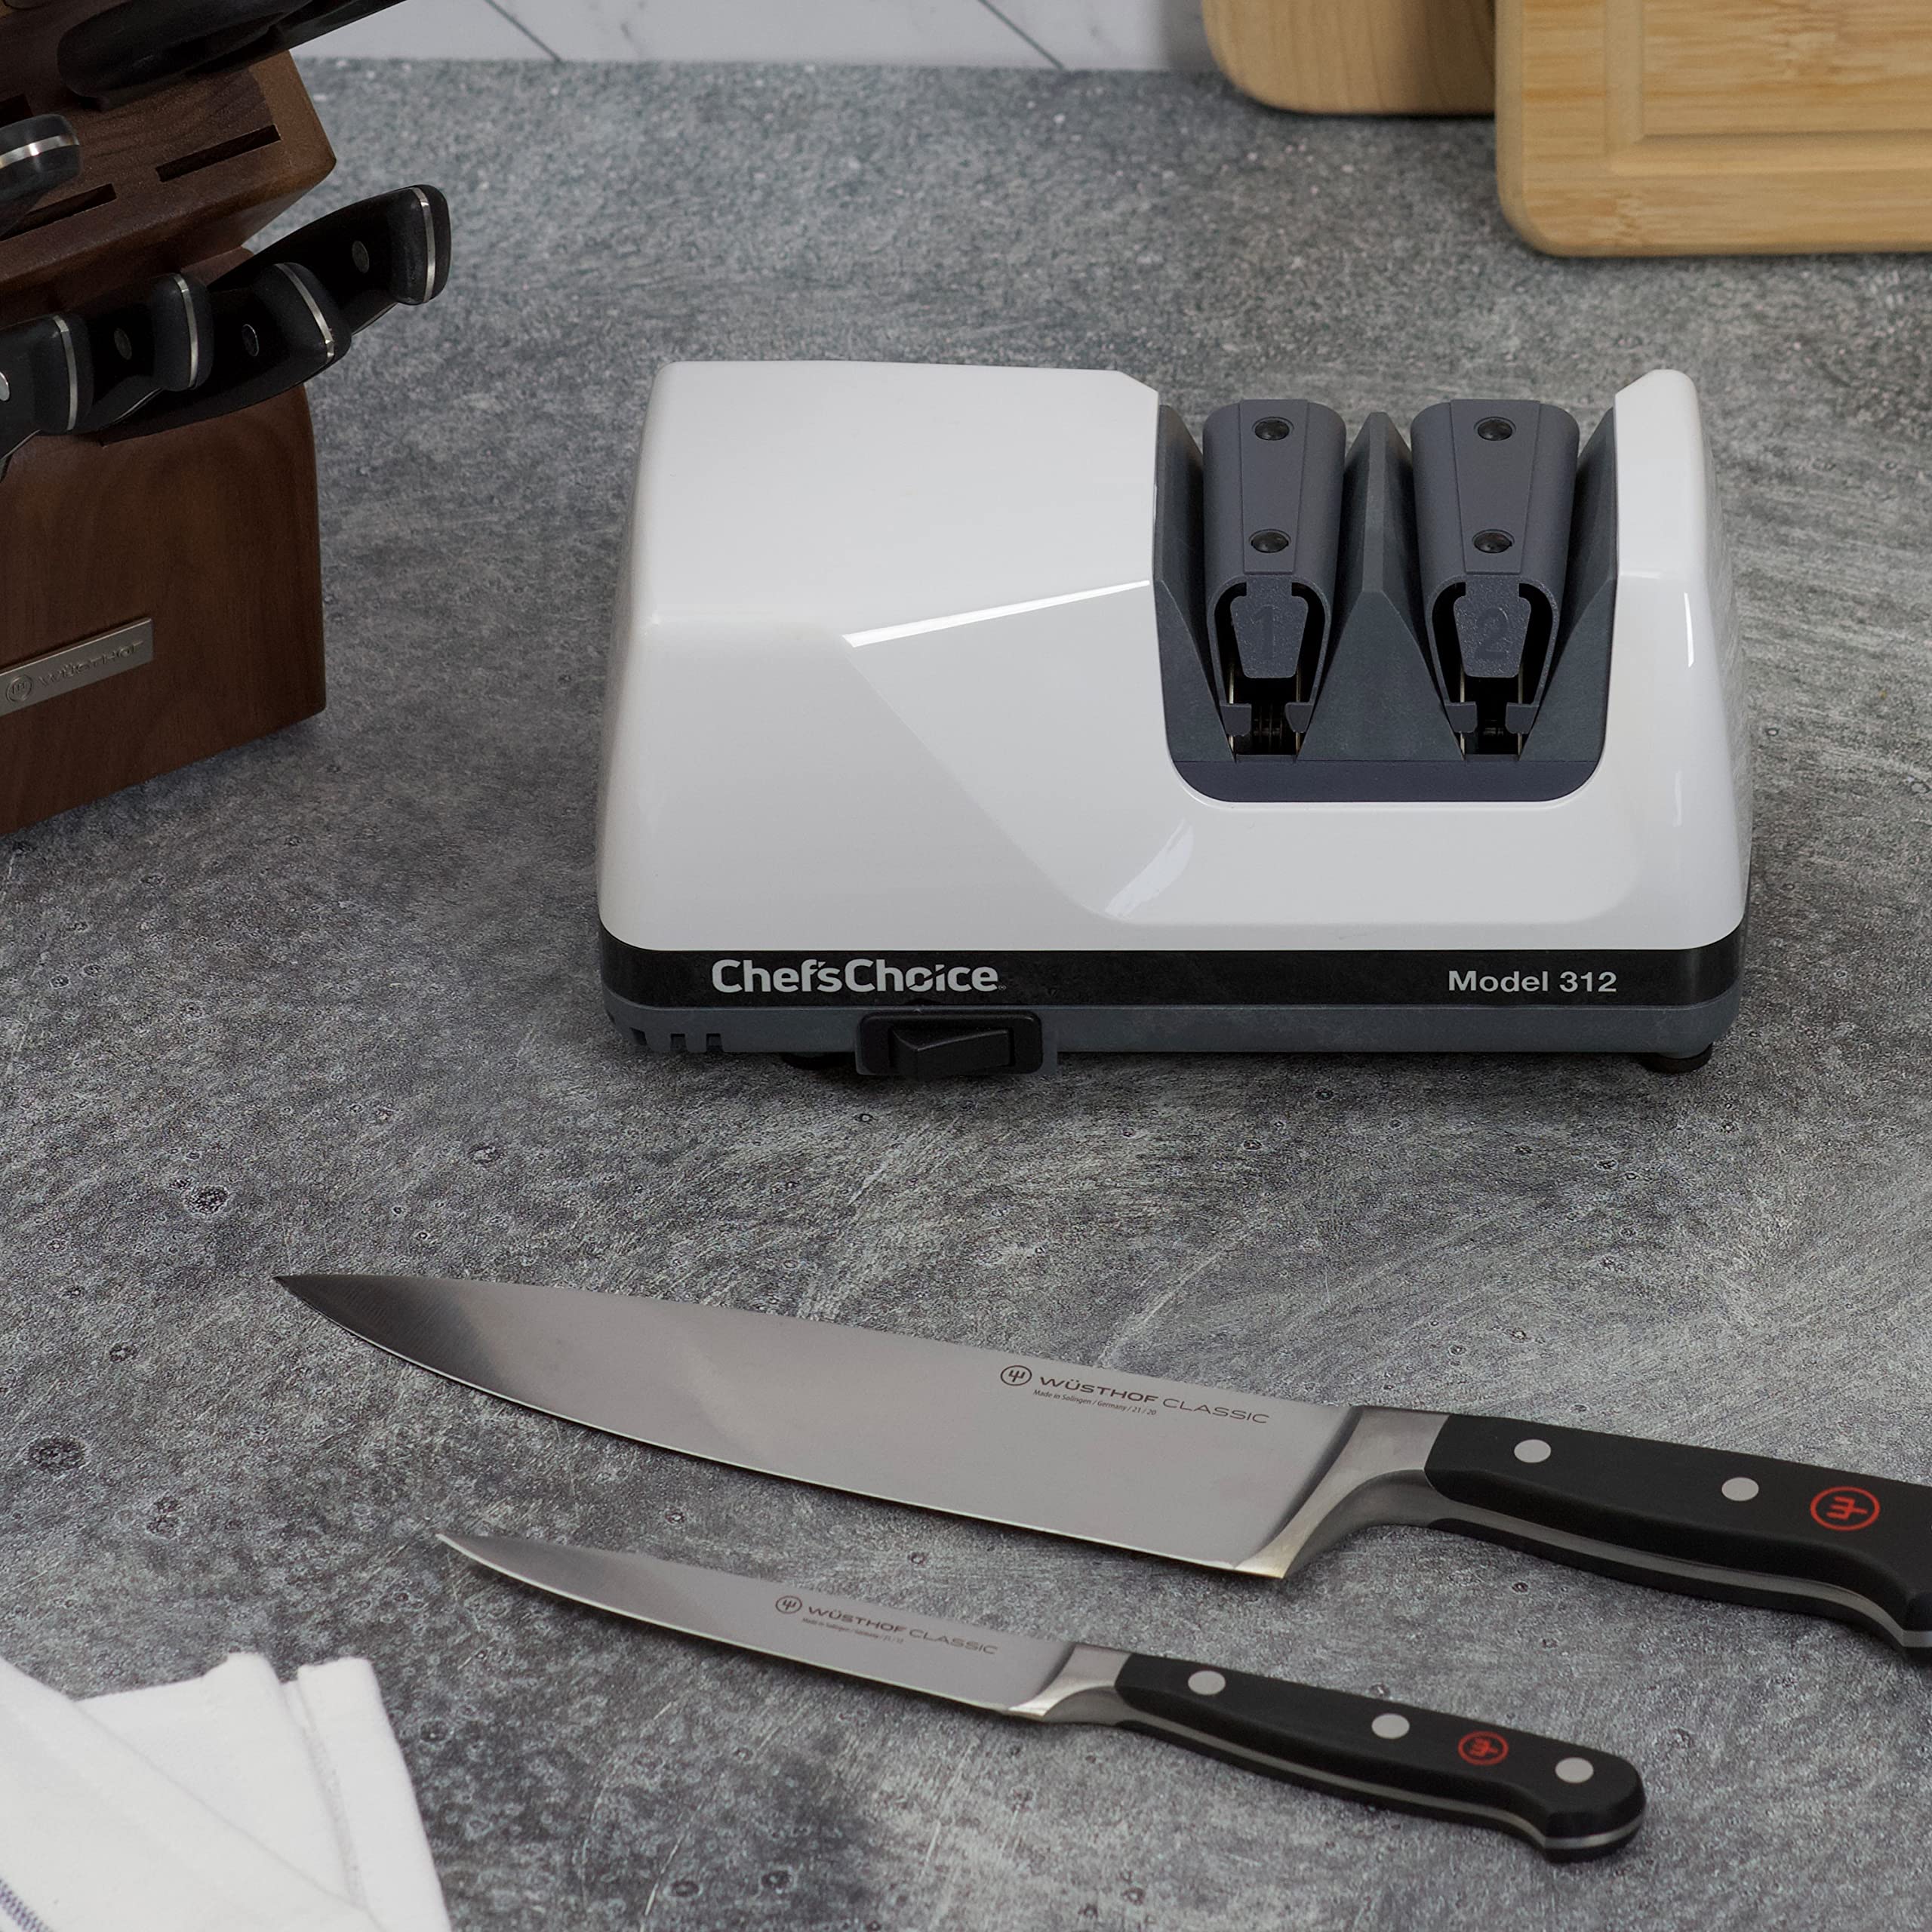 Chef'sChoice 312 UltraHone Professional Electric Knife Sharpener for 20-Degree Straight-Edge and Serrated Knives, 2 Stage, White $43